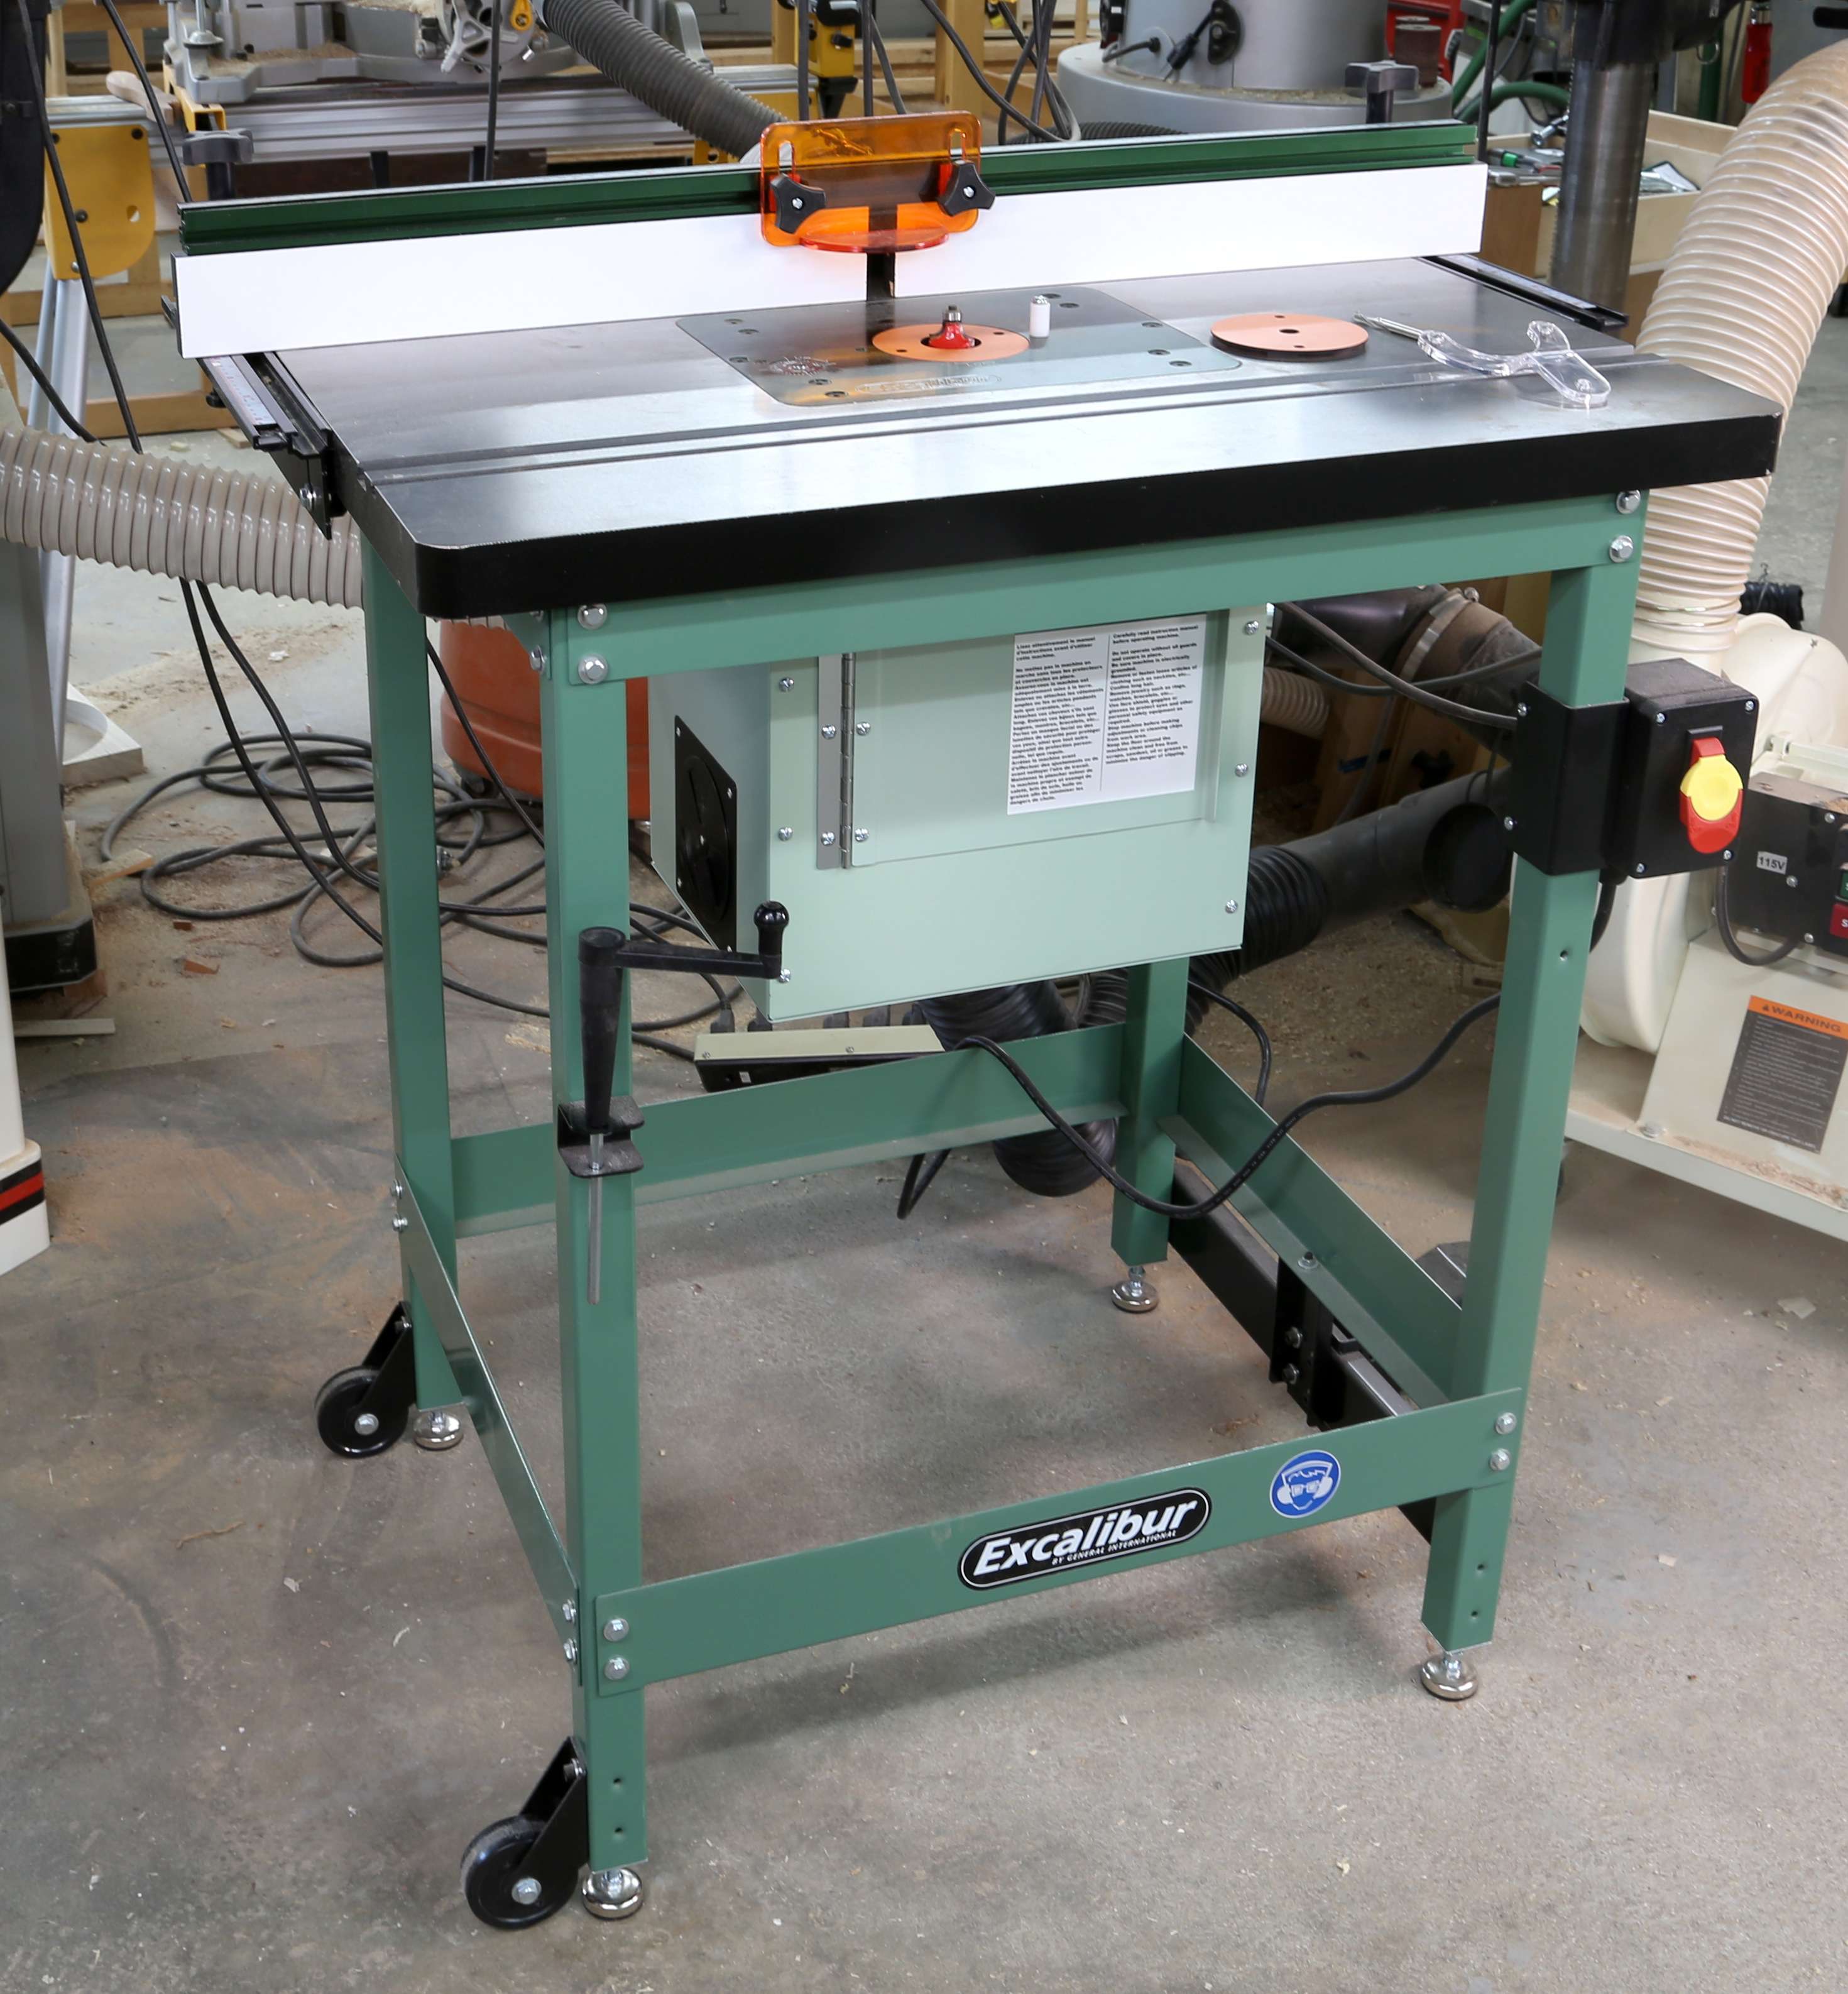 Excalibur Deluxe Router Table Review: Is This the Best Kit?